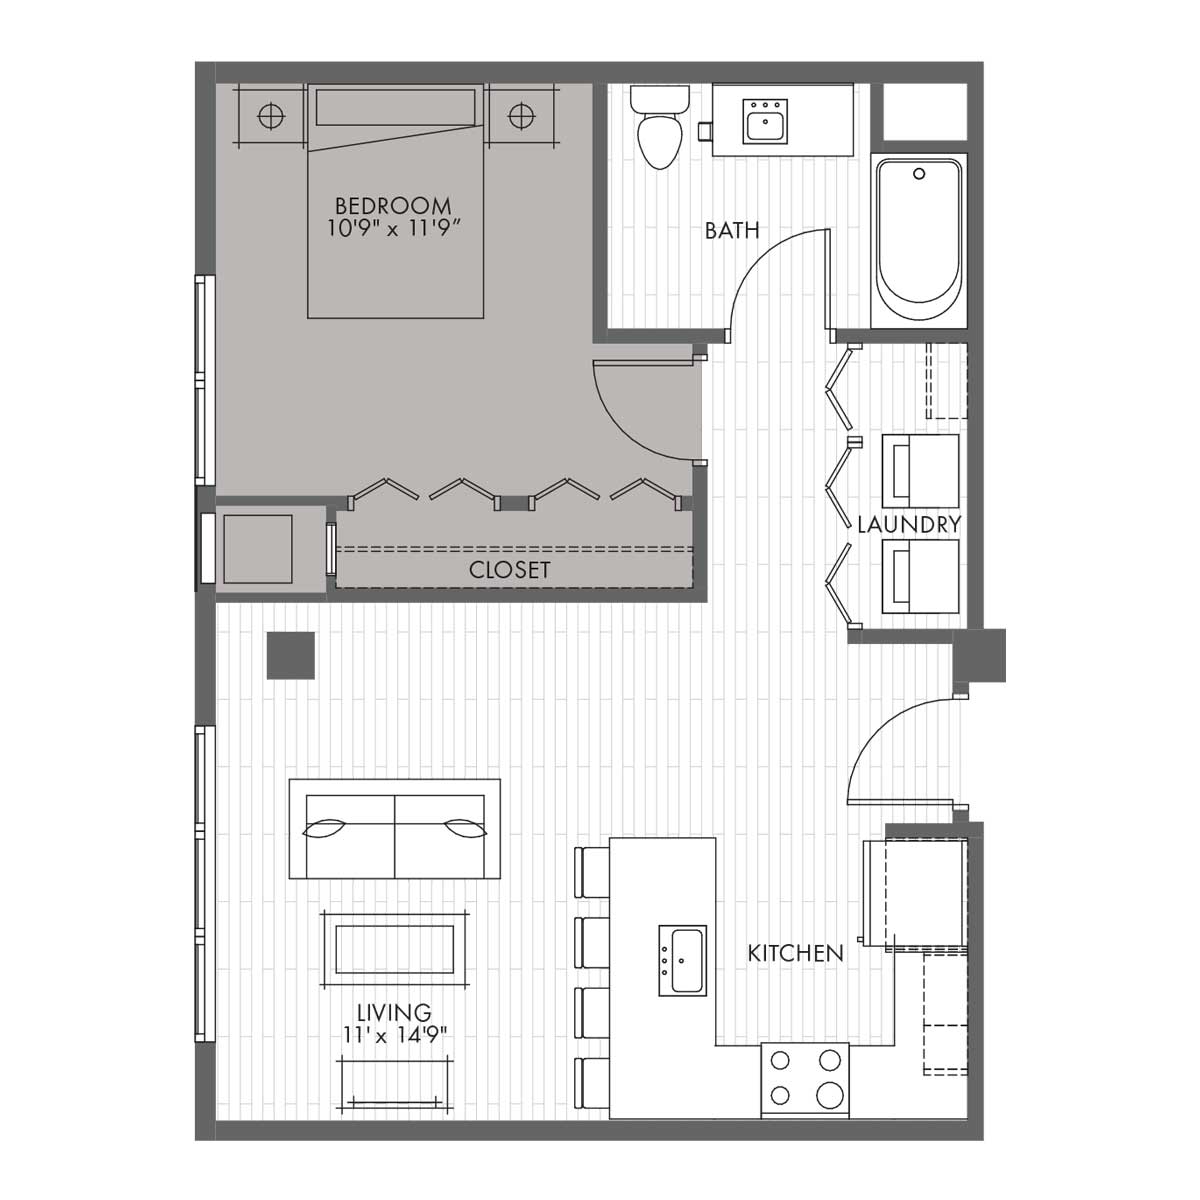 One Bedroom Apartment Floor Plans With Dimensions | www